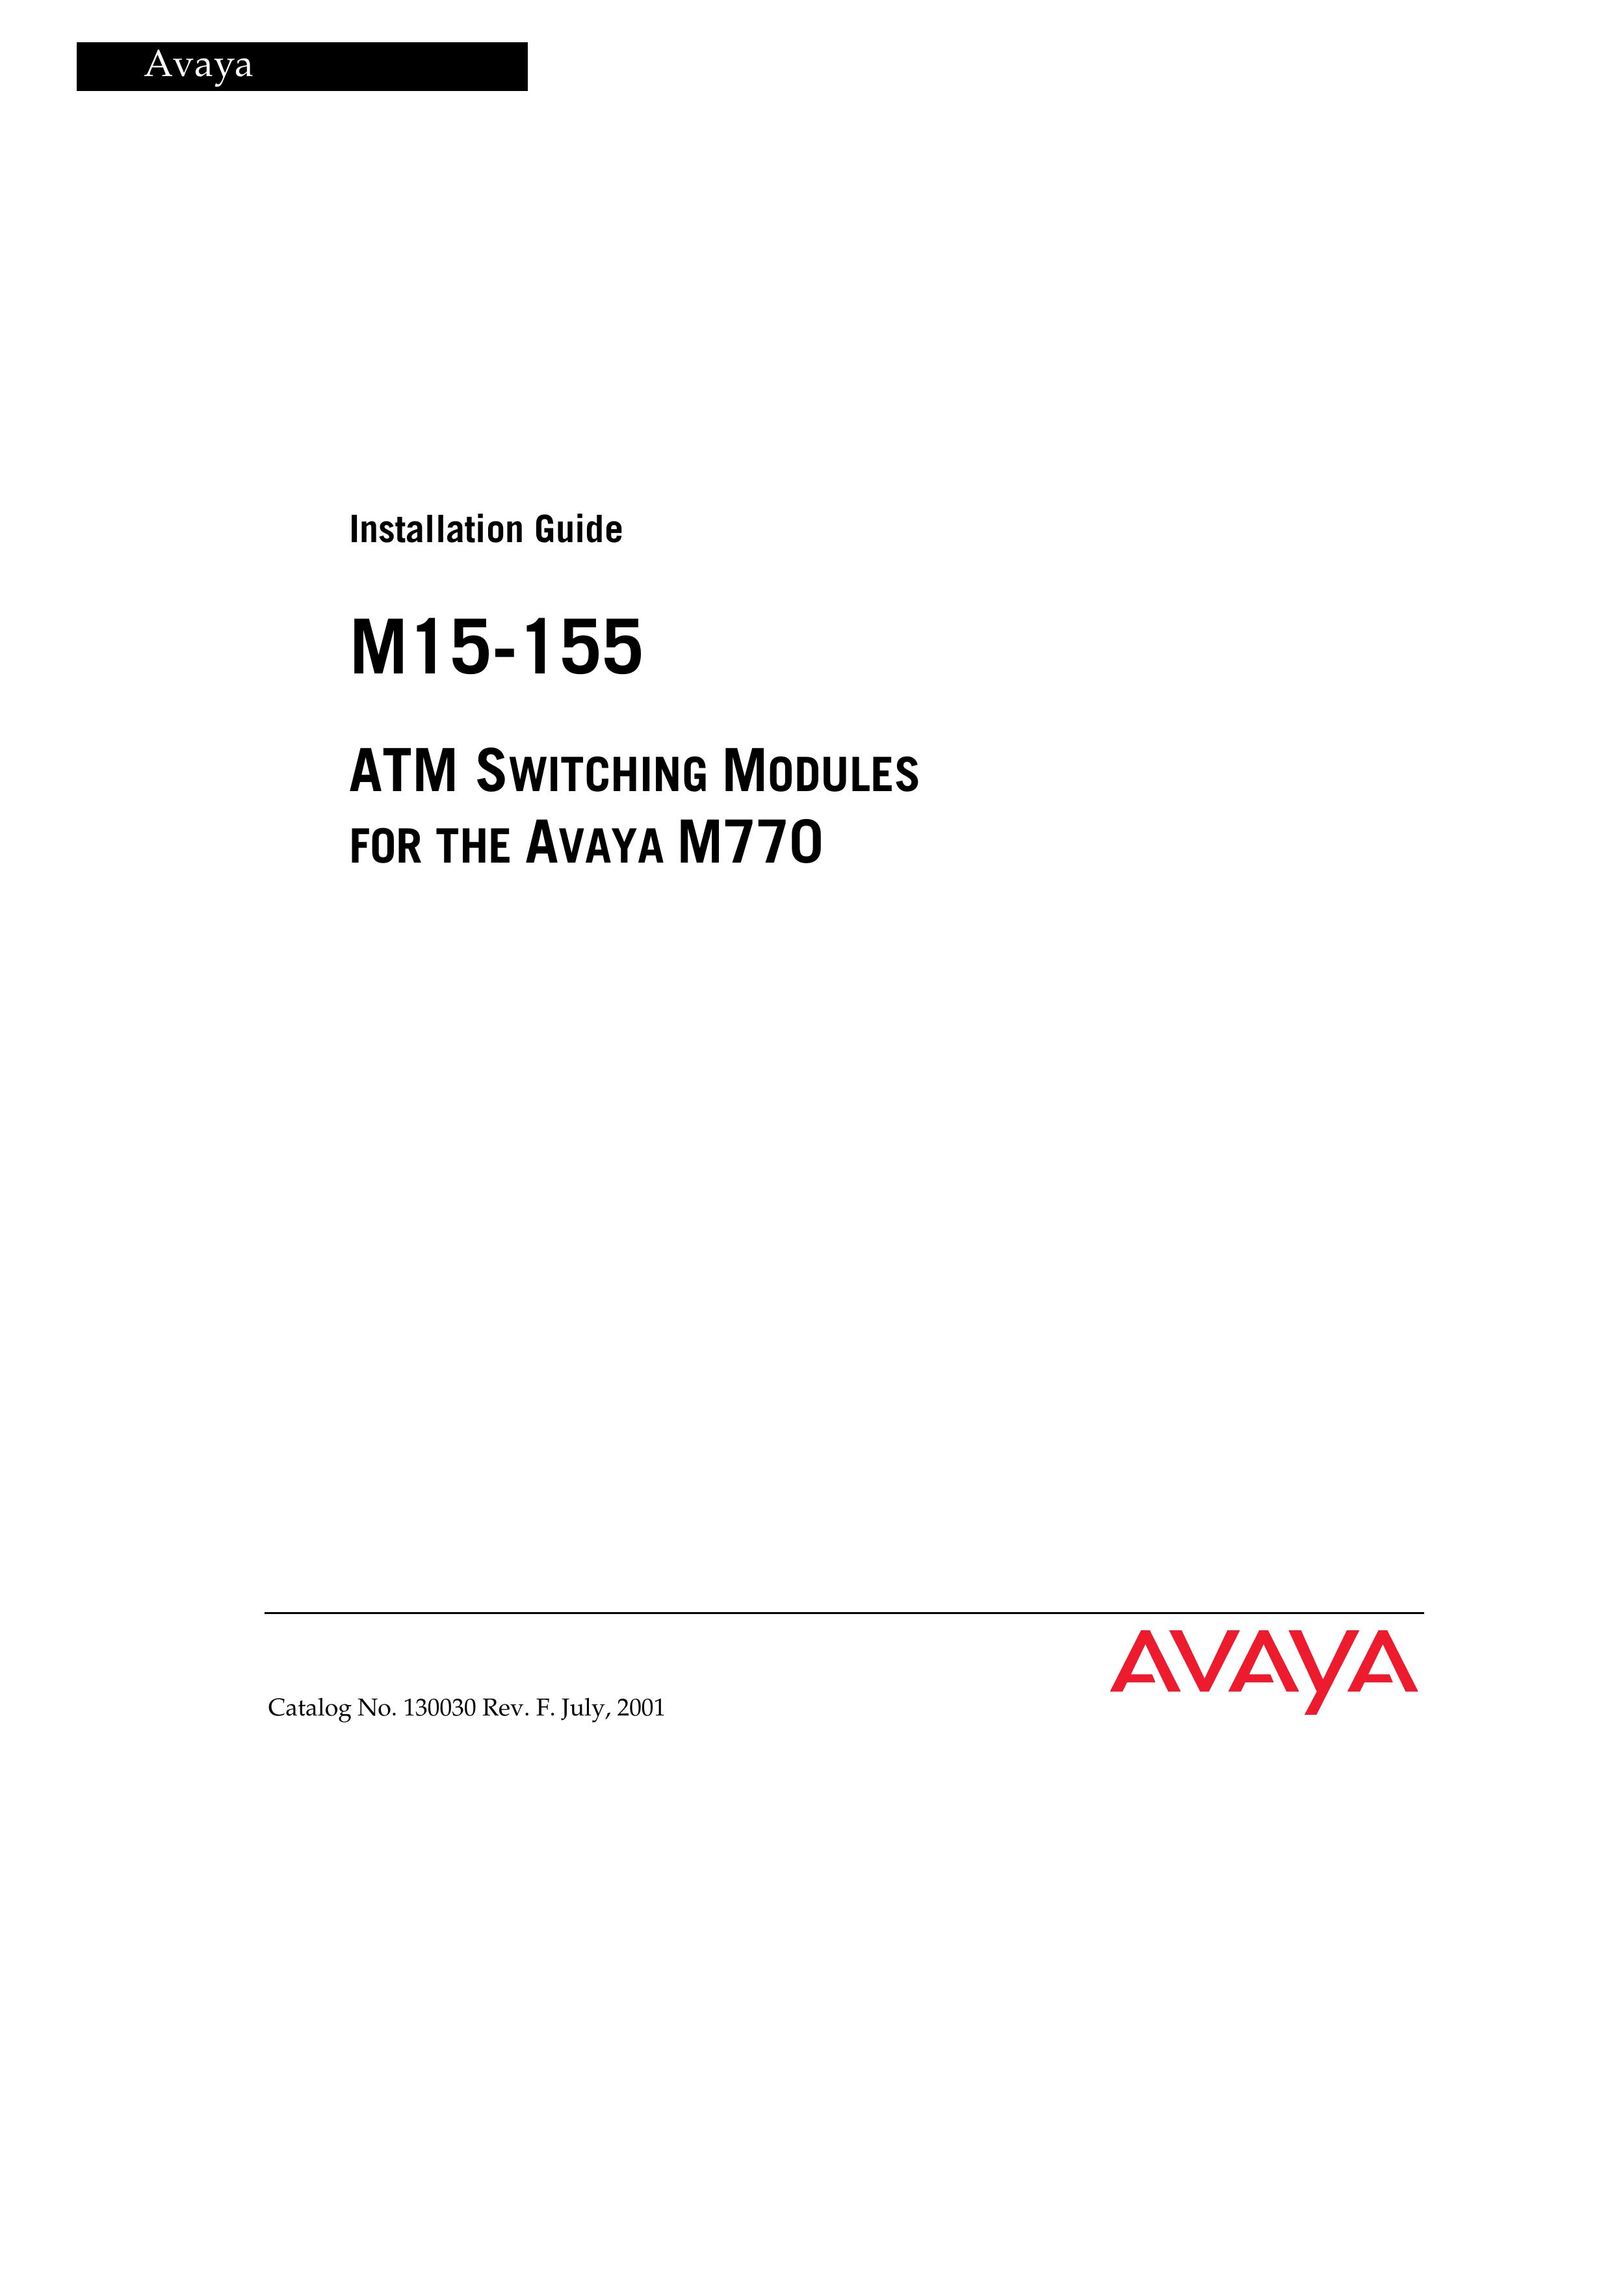 Canon M15-155 Switch User Manual